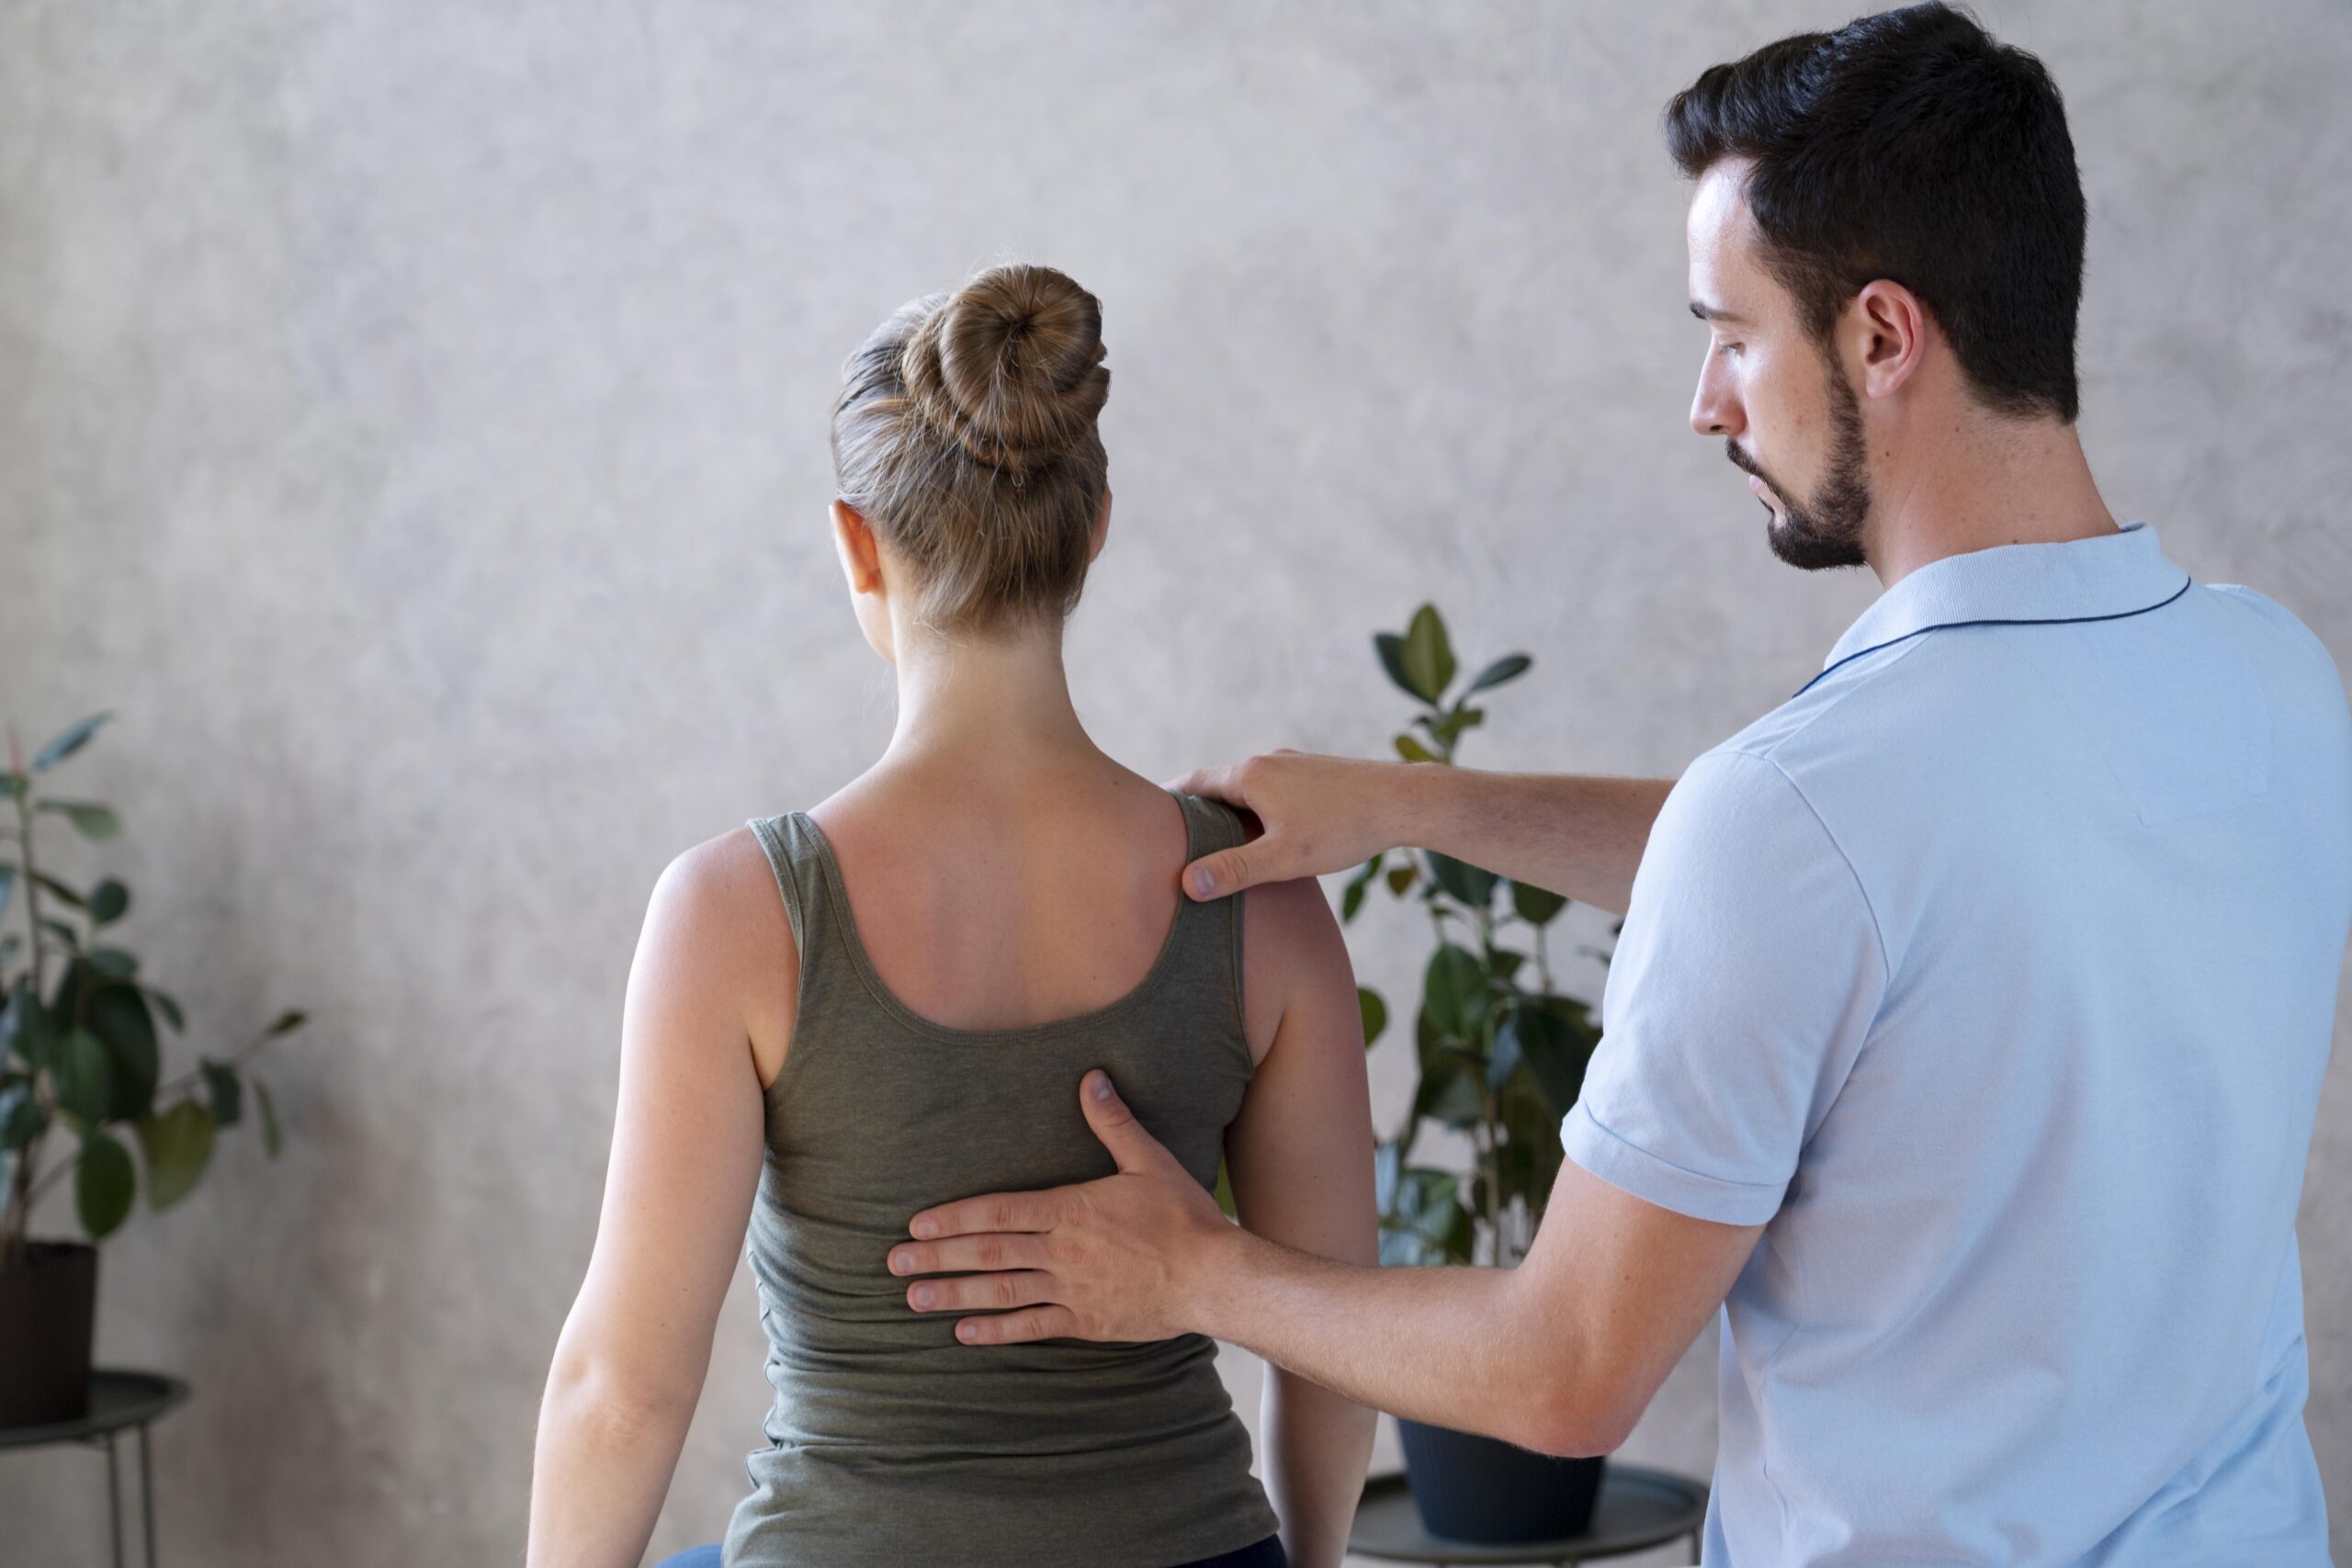 Amersham Chiropractors: Keeping Your Body Safe and Healthy